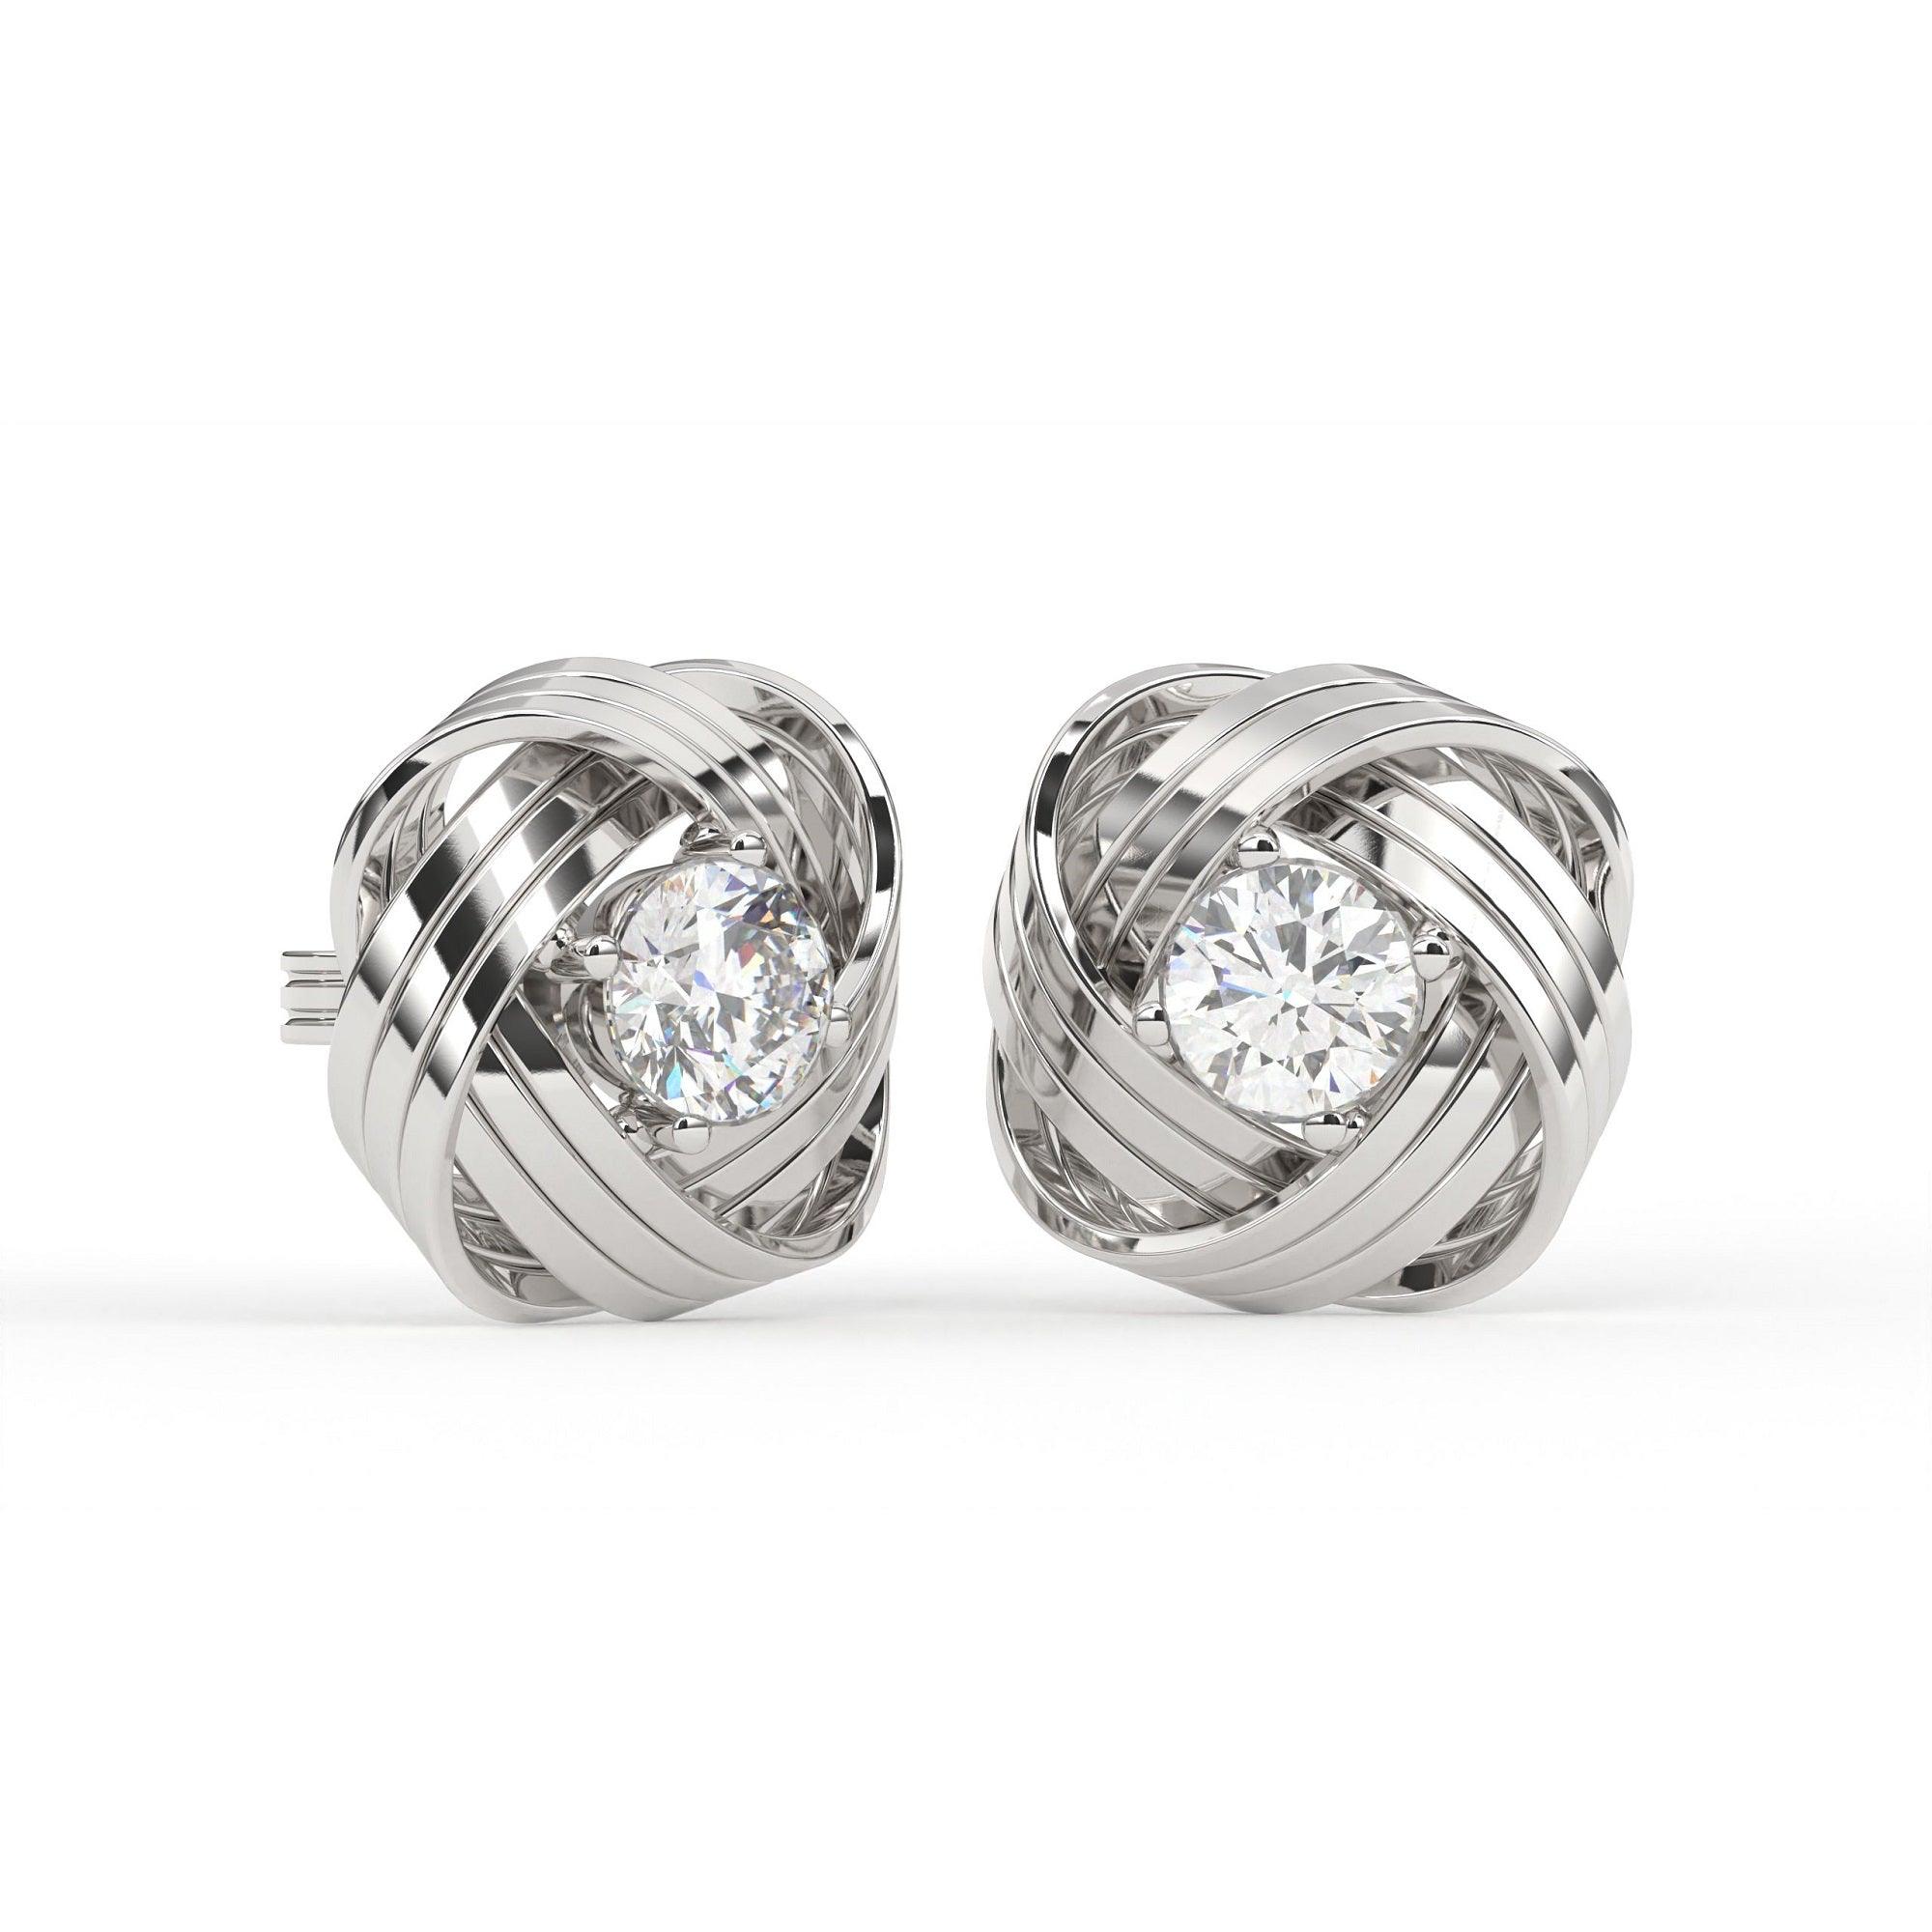 Auory 925 Sterling Silver Round Earring AUPE-311 - Auory